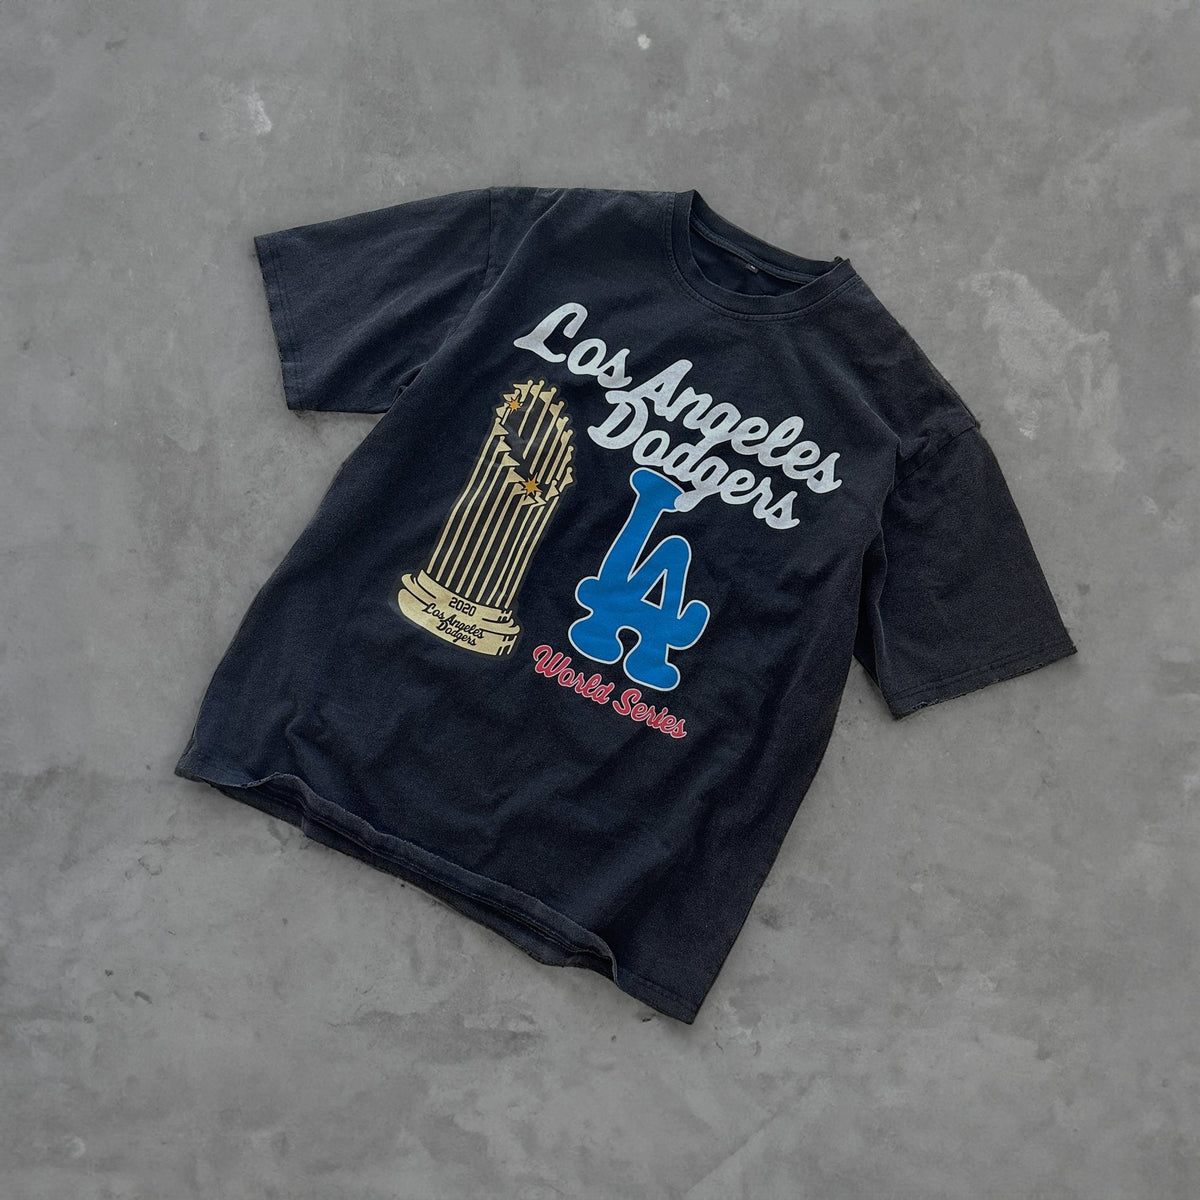 Vintage LA World Champs Tee - RED LETTERS